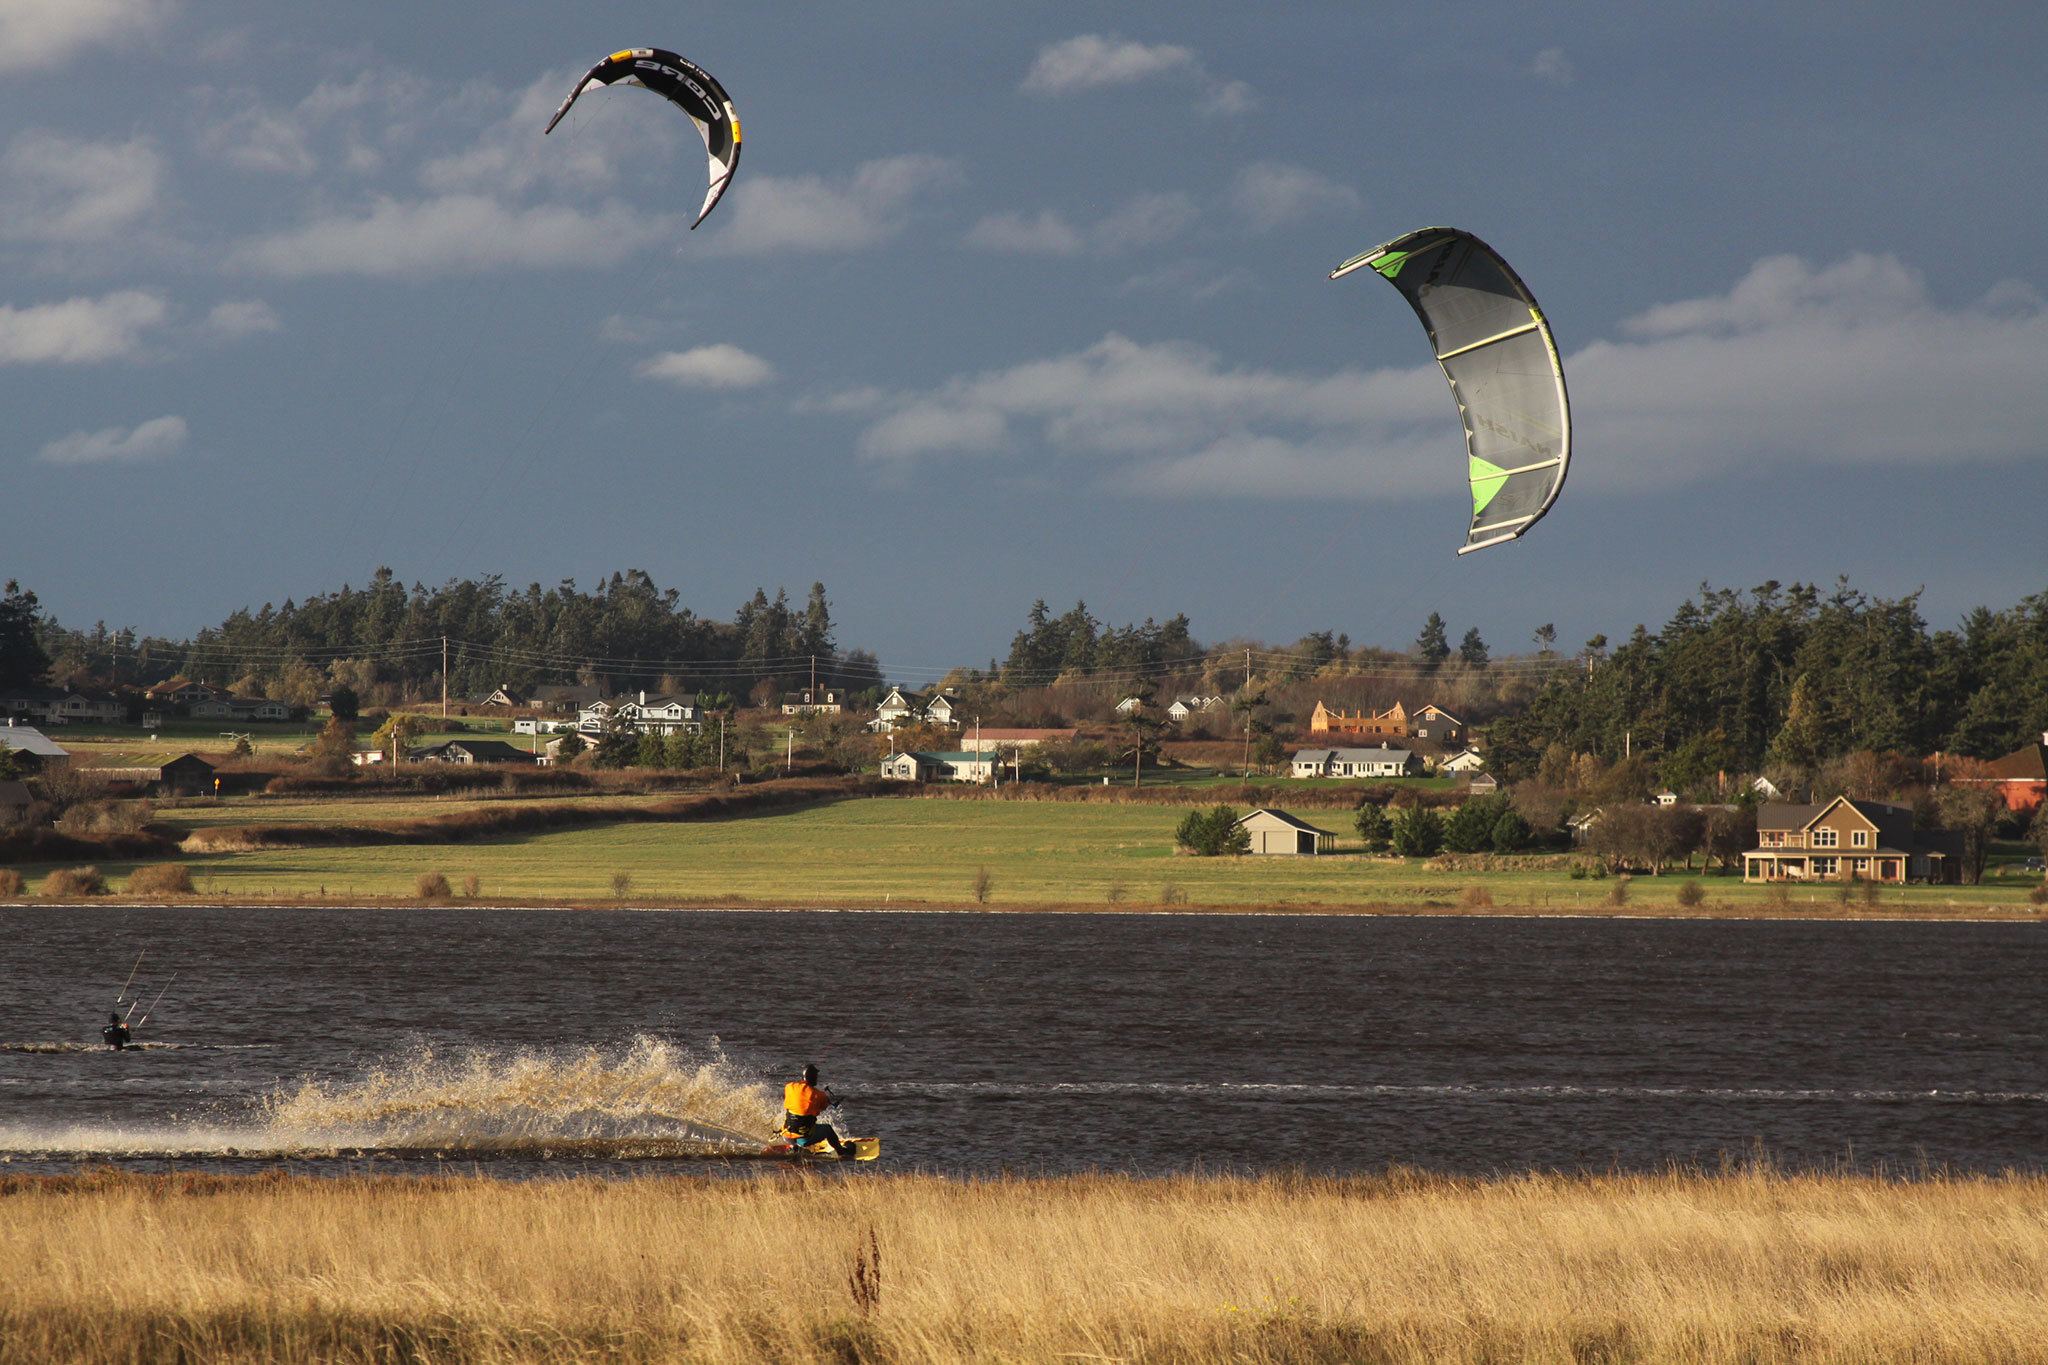 Kiteboarders tackle Crockett Lake in Coupeville Sunday, Nov. 13. Photo by Ron Newberry/Whidbey News-Times